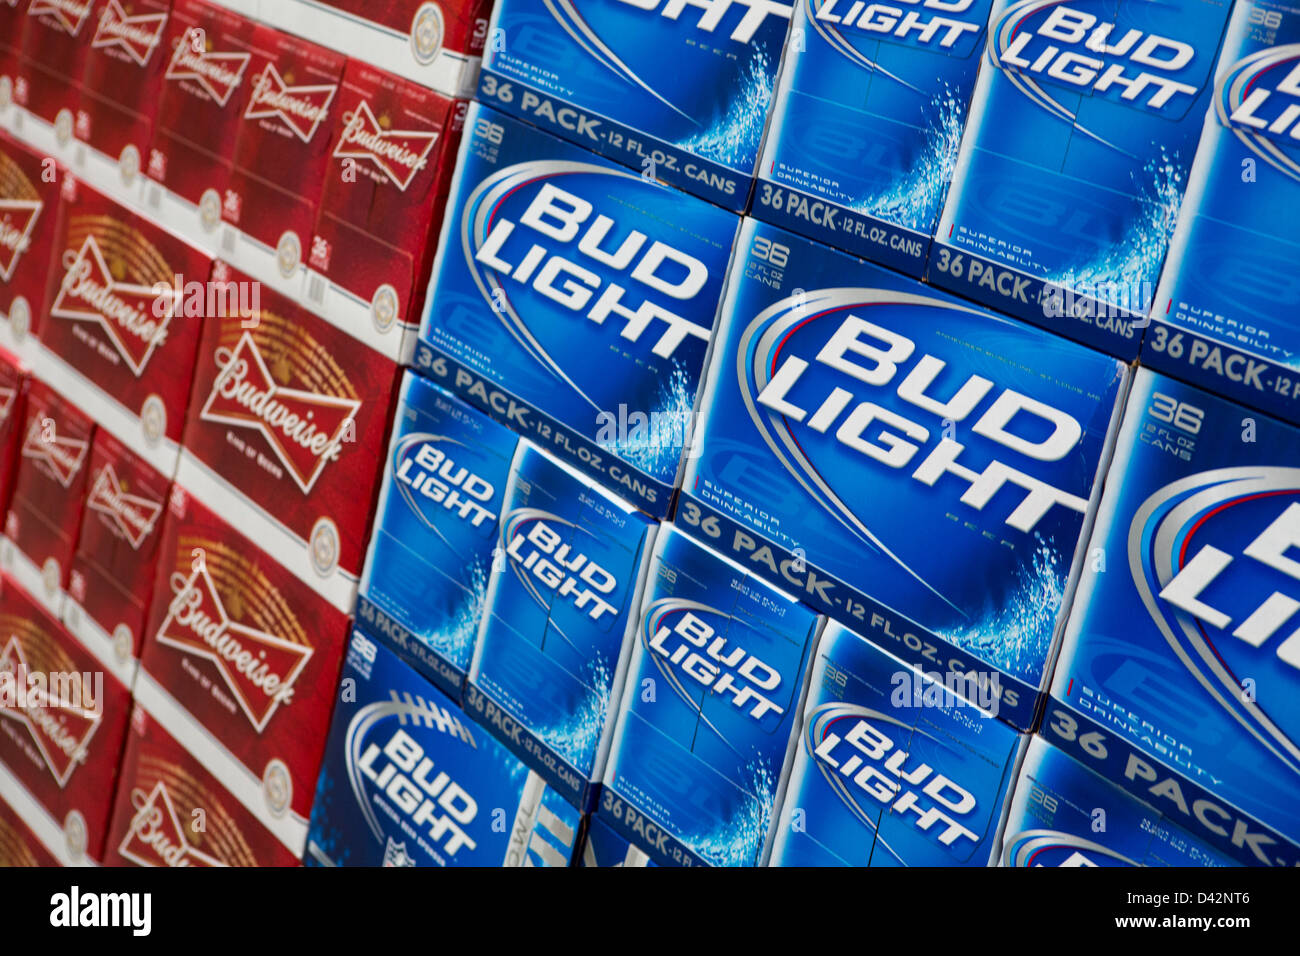 Budweiser and Bud Light beer on display at a Costco Wholesale Warehouse Club. Stock Photo